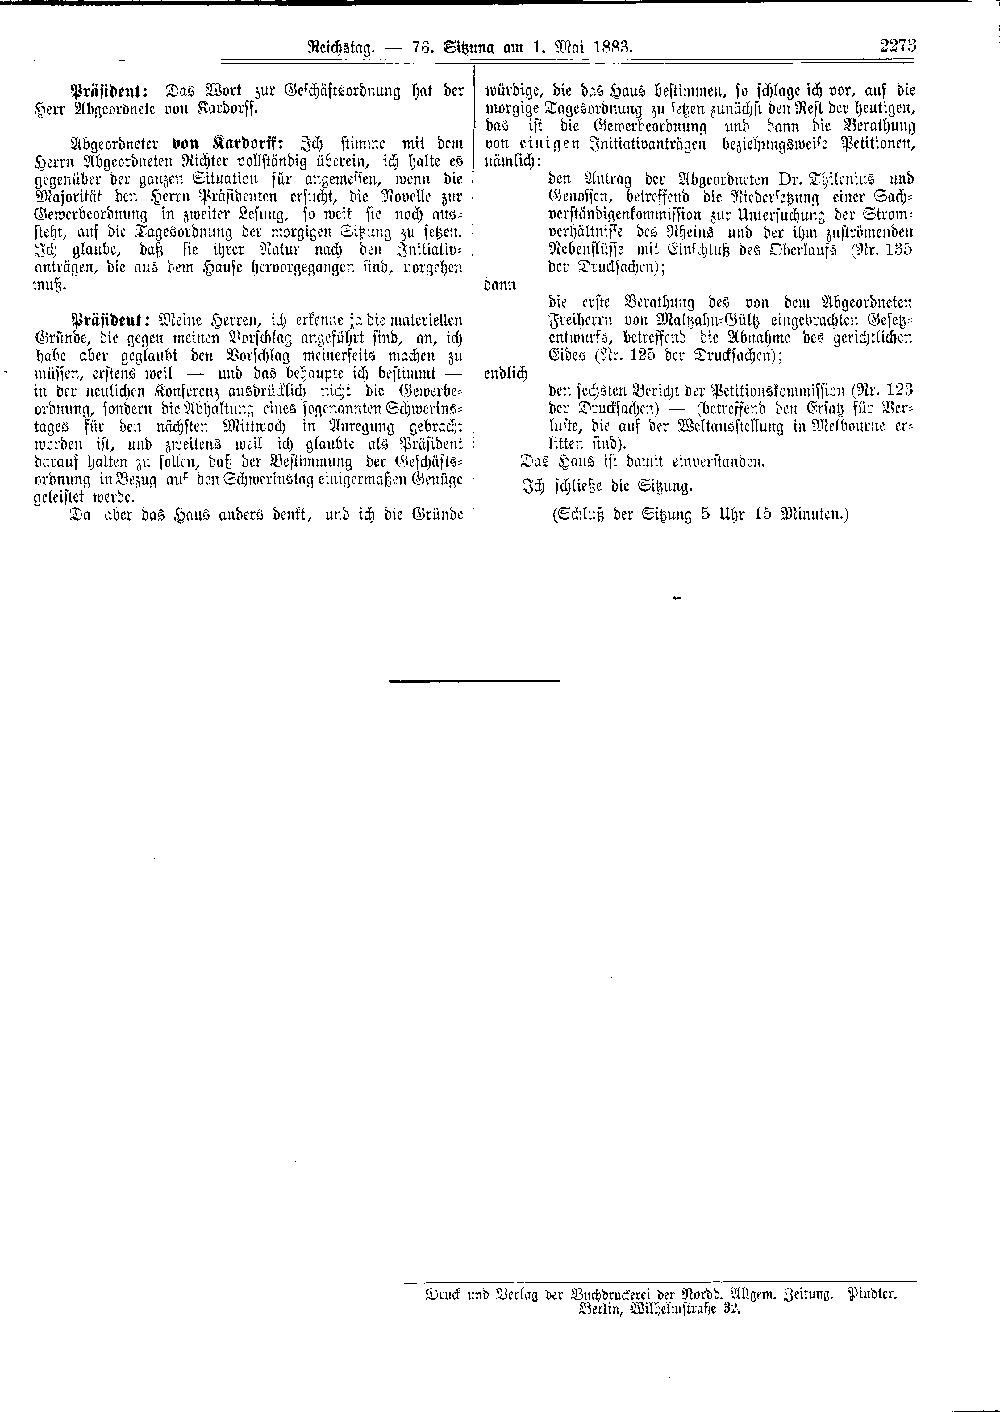 Scan of page 2273